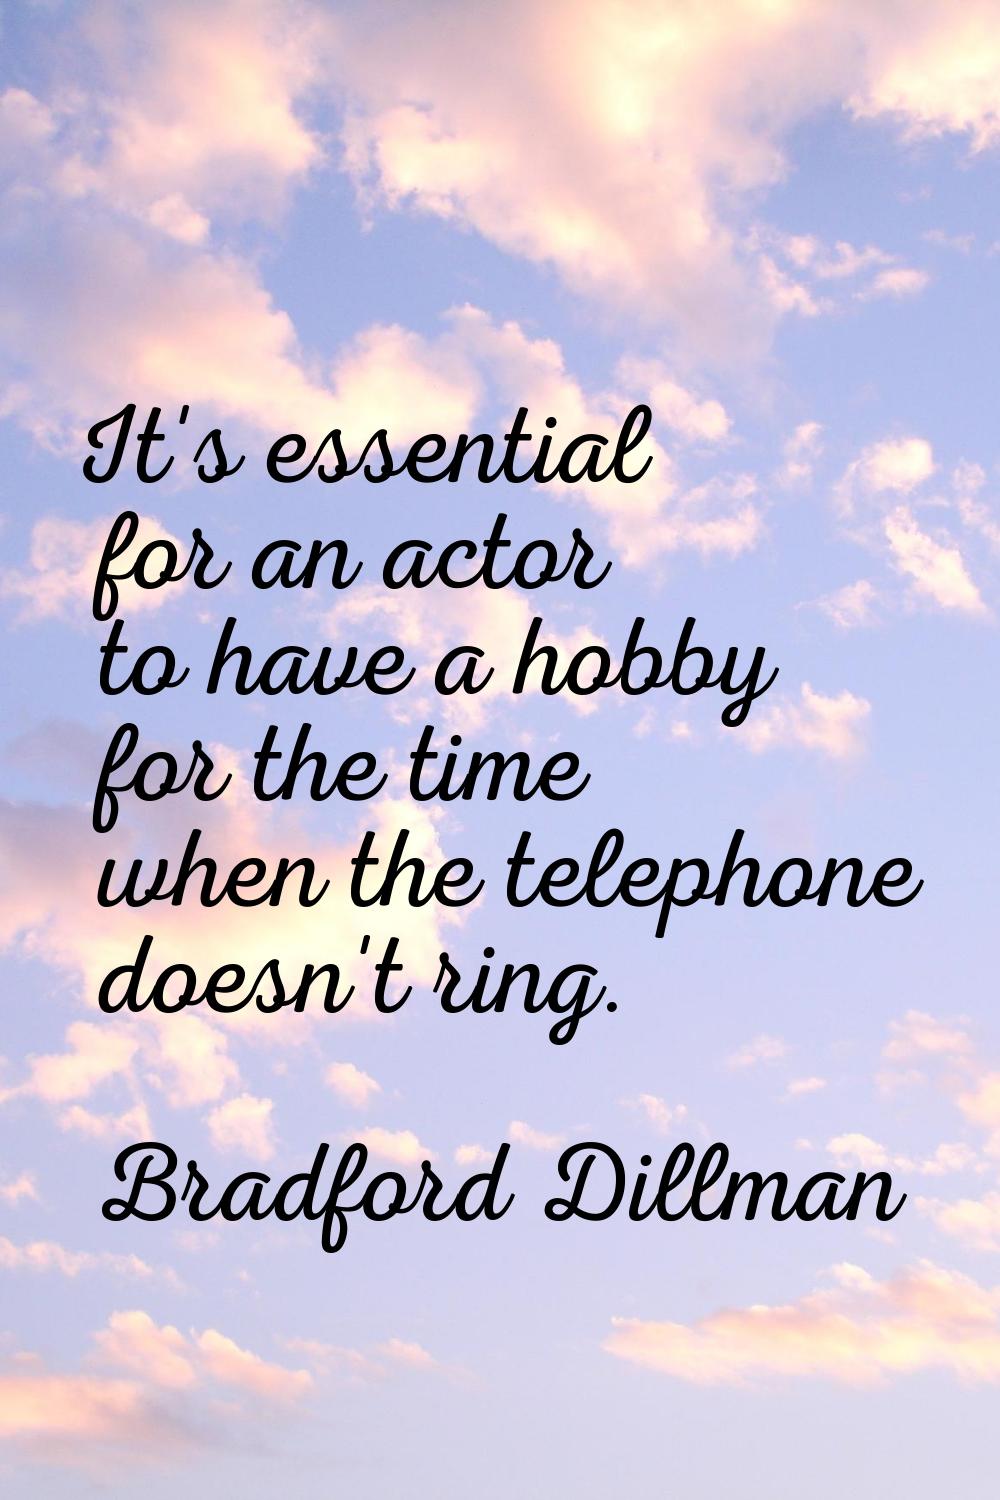 It's essential for an actor to have a hobby for the time when the telephone doesn't ring.